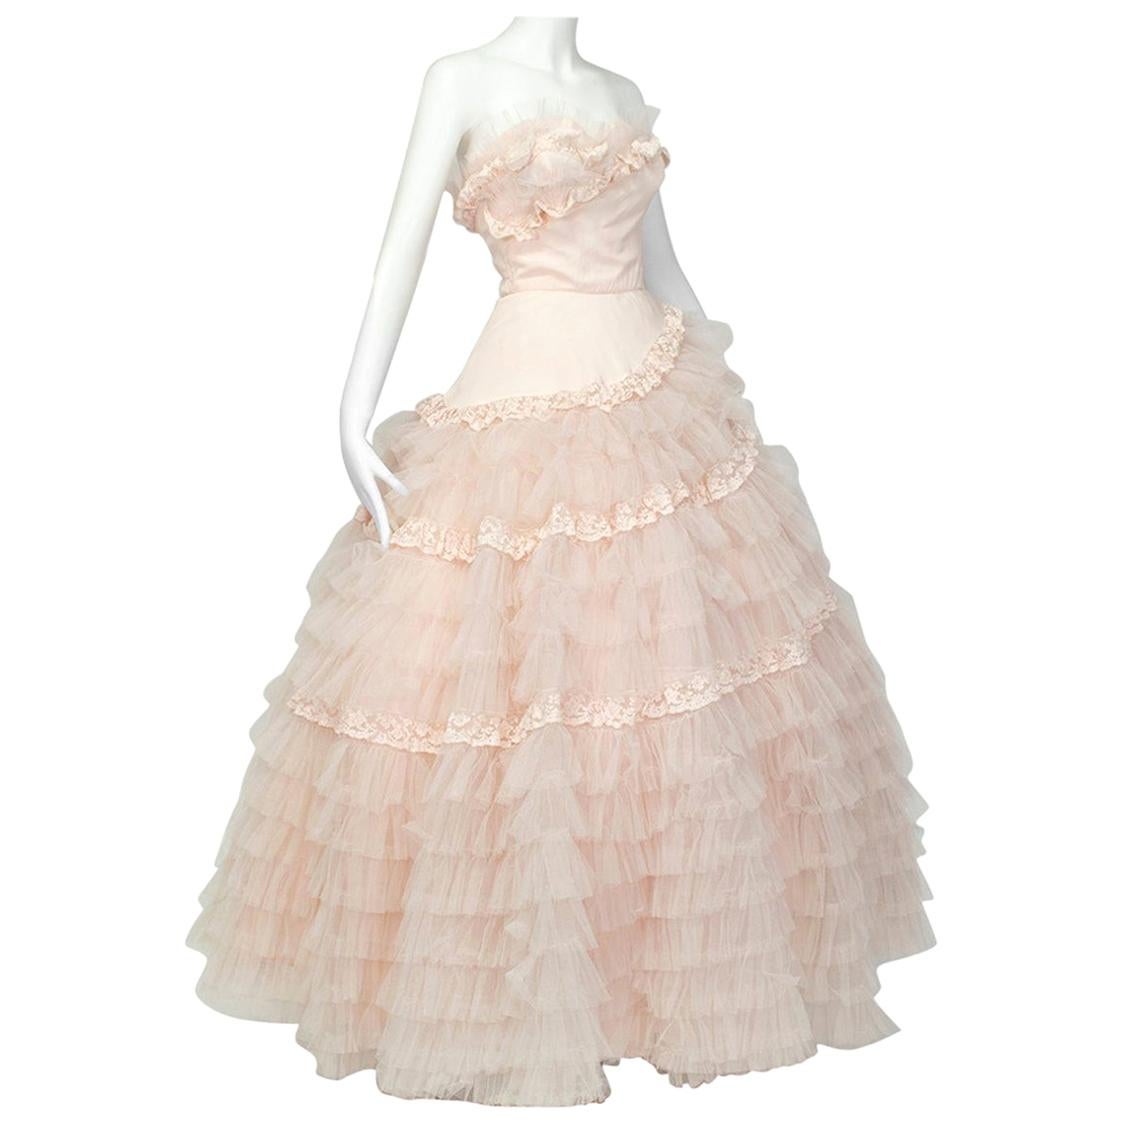 Will Steinman Pink Strapless Asymmetrical Lace Wedding Ball Gown - Small, 1950s